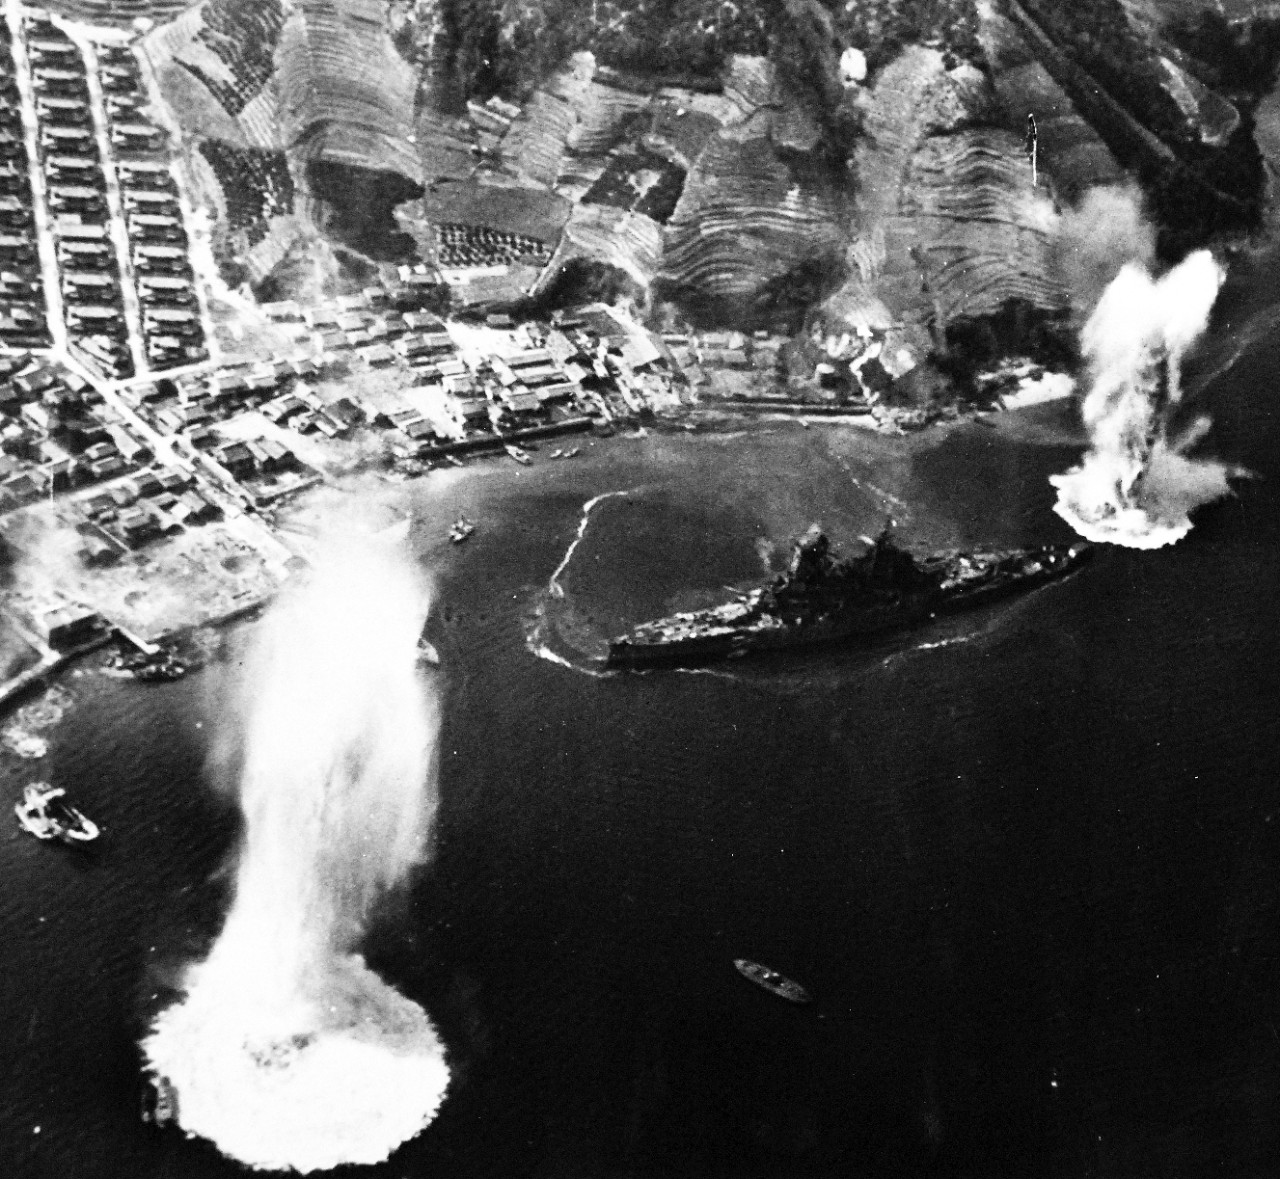 80-G-490226:  Raids on Japanese Home Islands, July 28, 1945.  Japanese battleship Haruna under attack by American and British carrier planes in Kure Bay, Japan, July 28, 1945.  U.S. Navy Photograph, now in the collections of the National Archives. (2015/12/08).